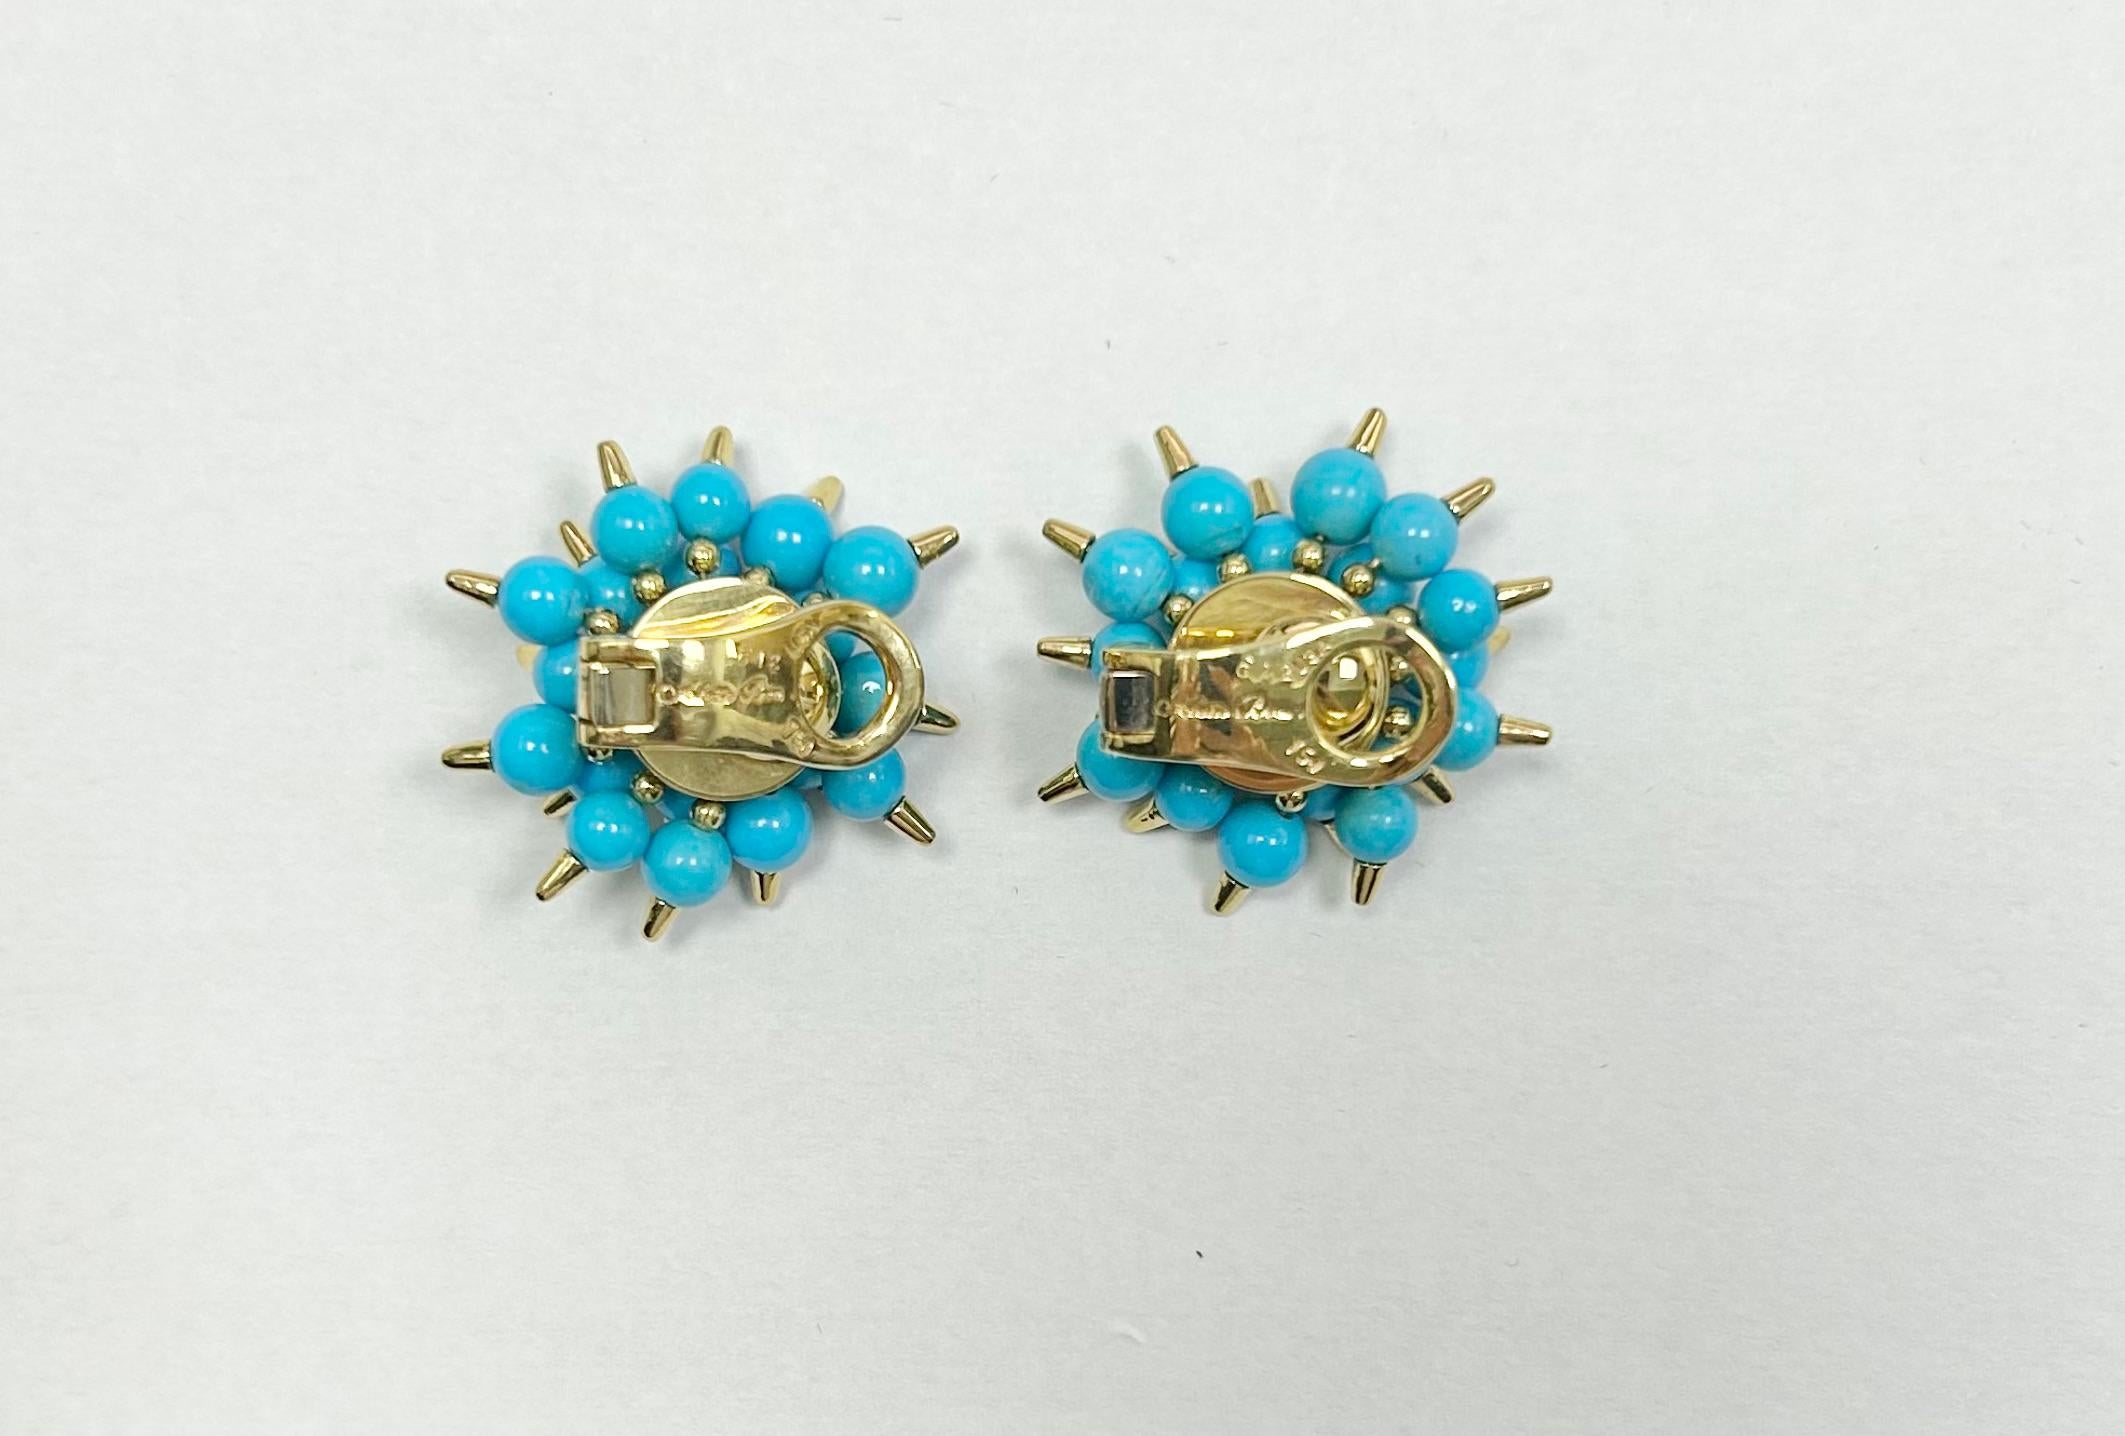 Alittle Brother Turquoise 18k YG Ear Clip Earrings In Excellent Condition For Sale In New York, NY